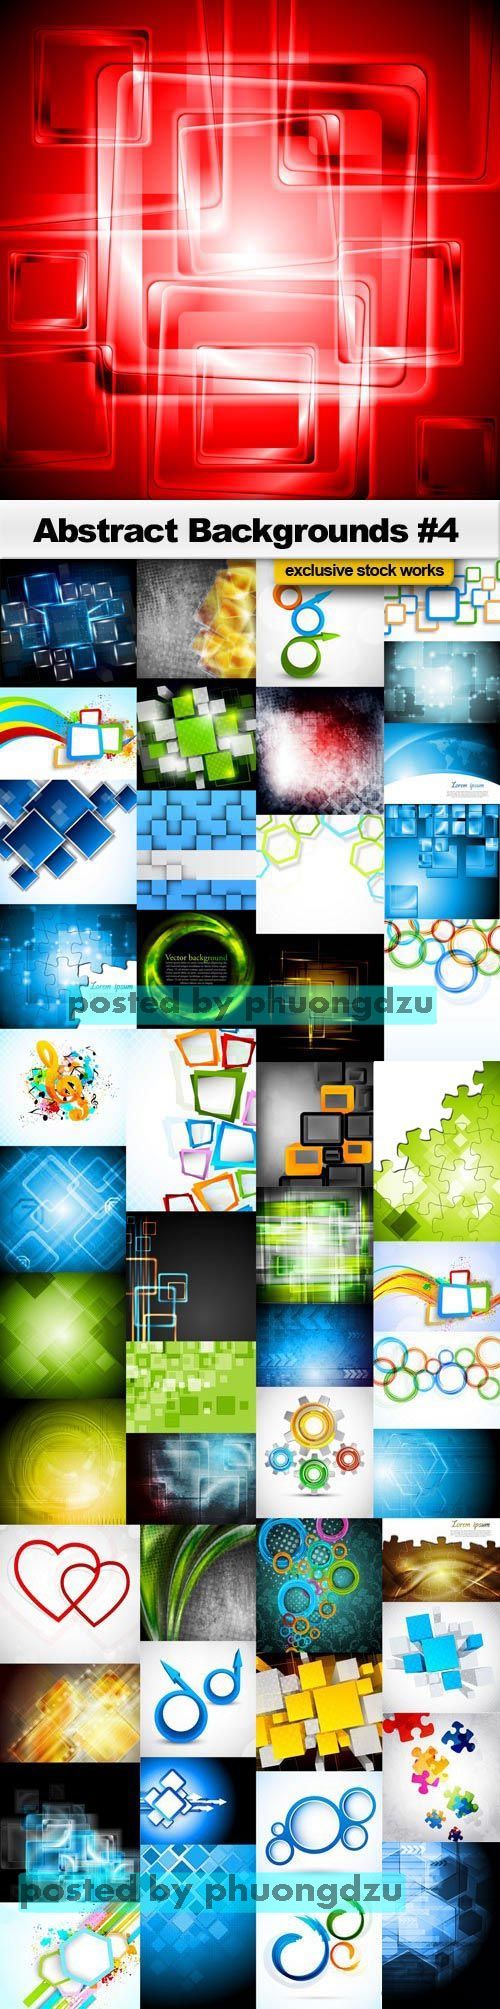 Abstract Backgrounds Vector set 4